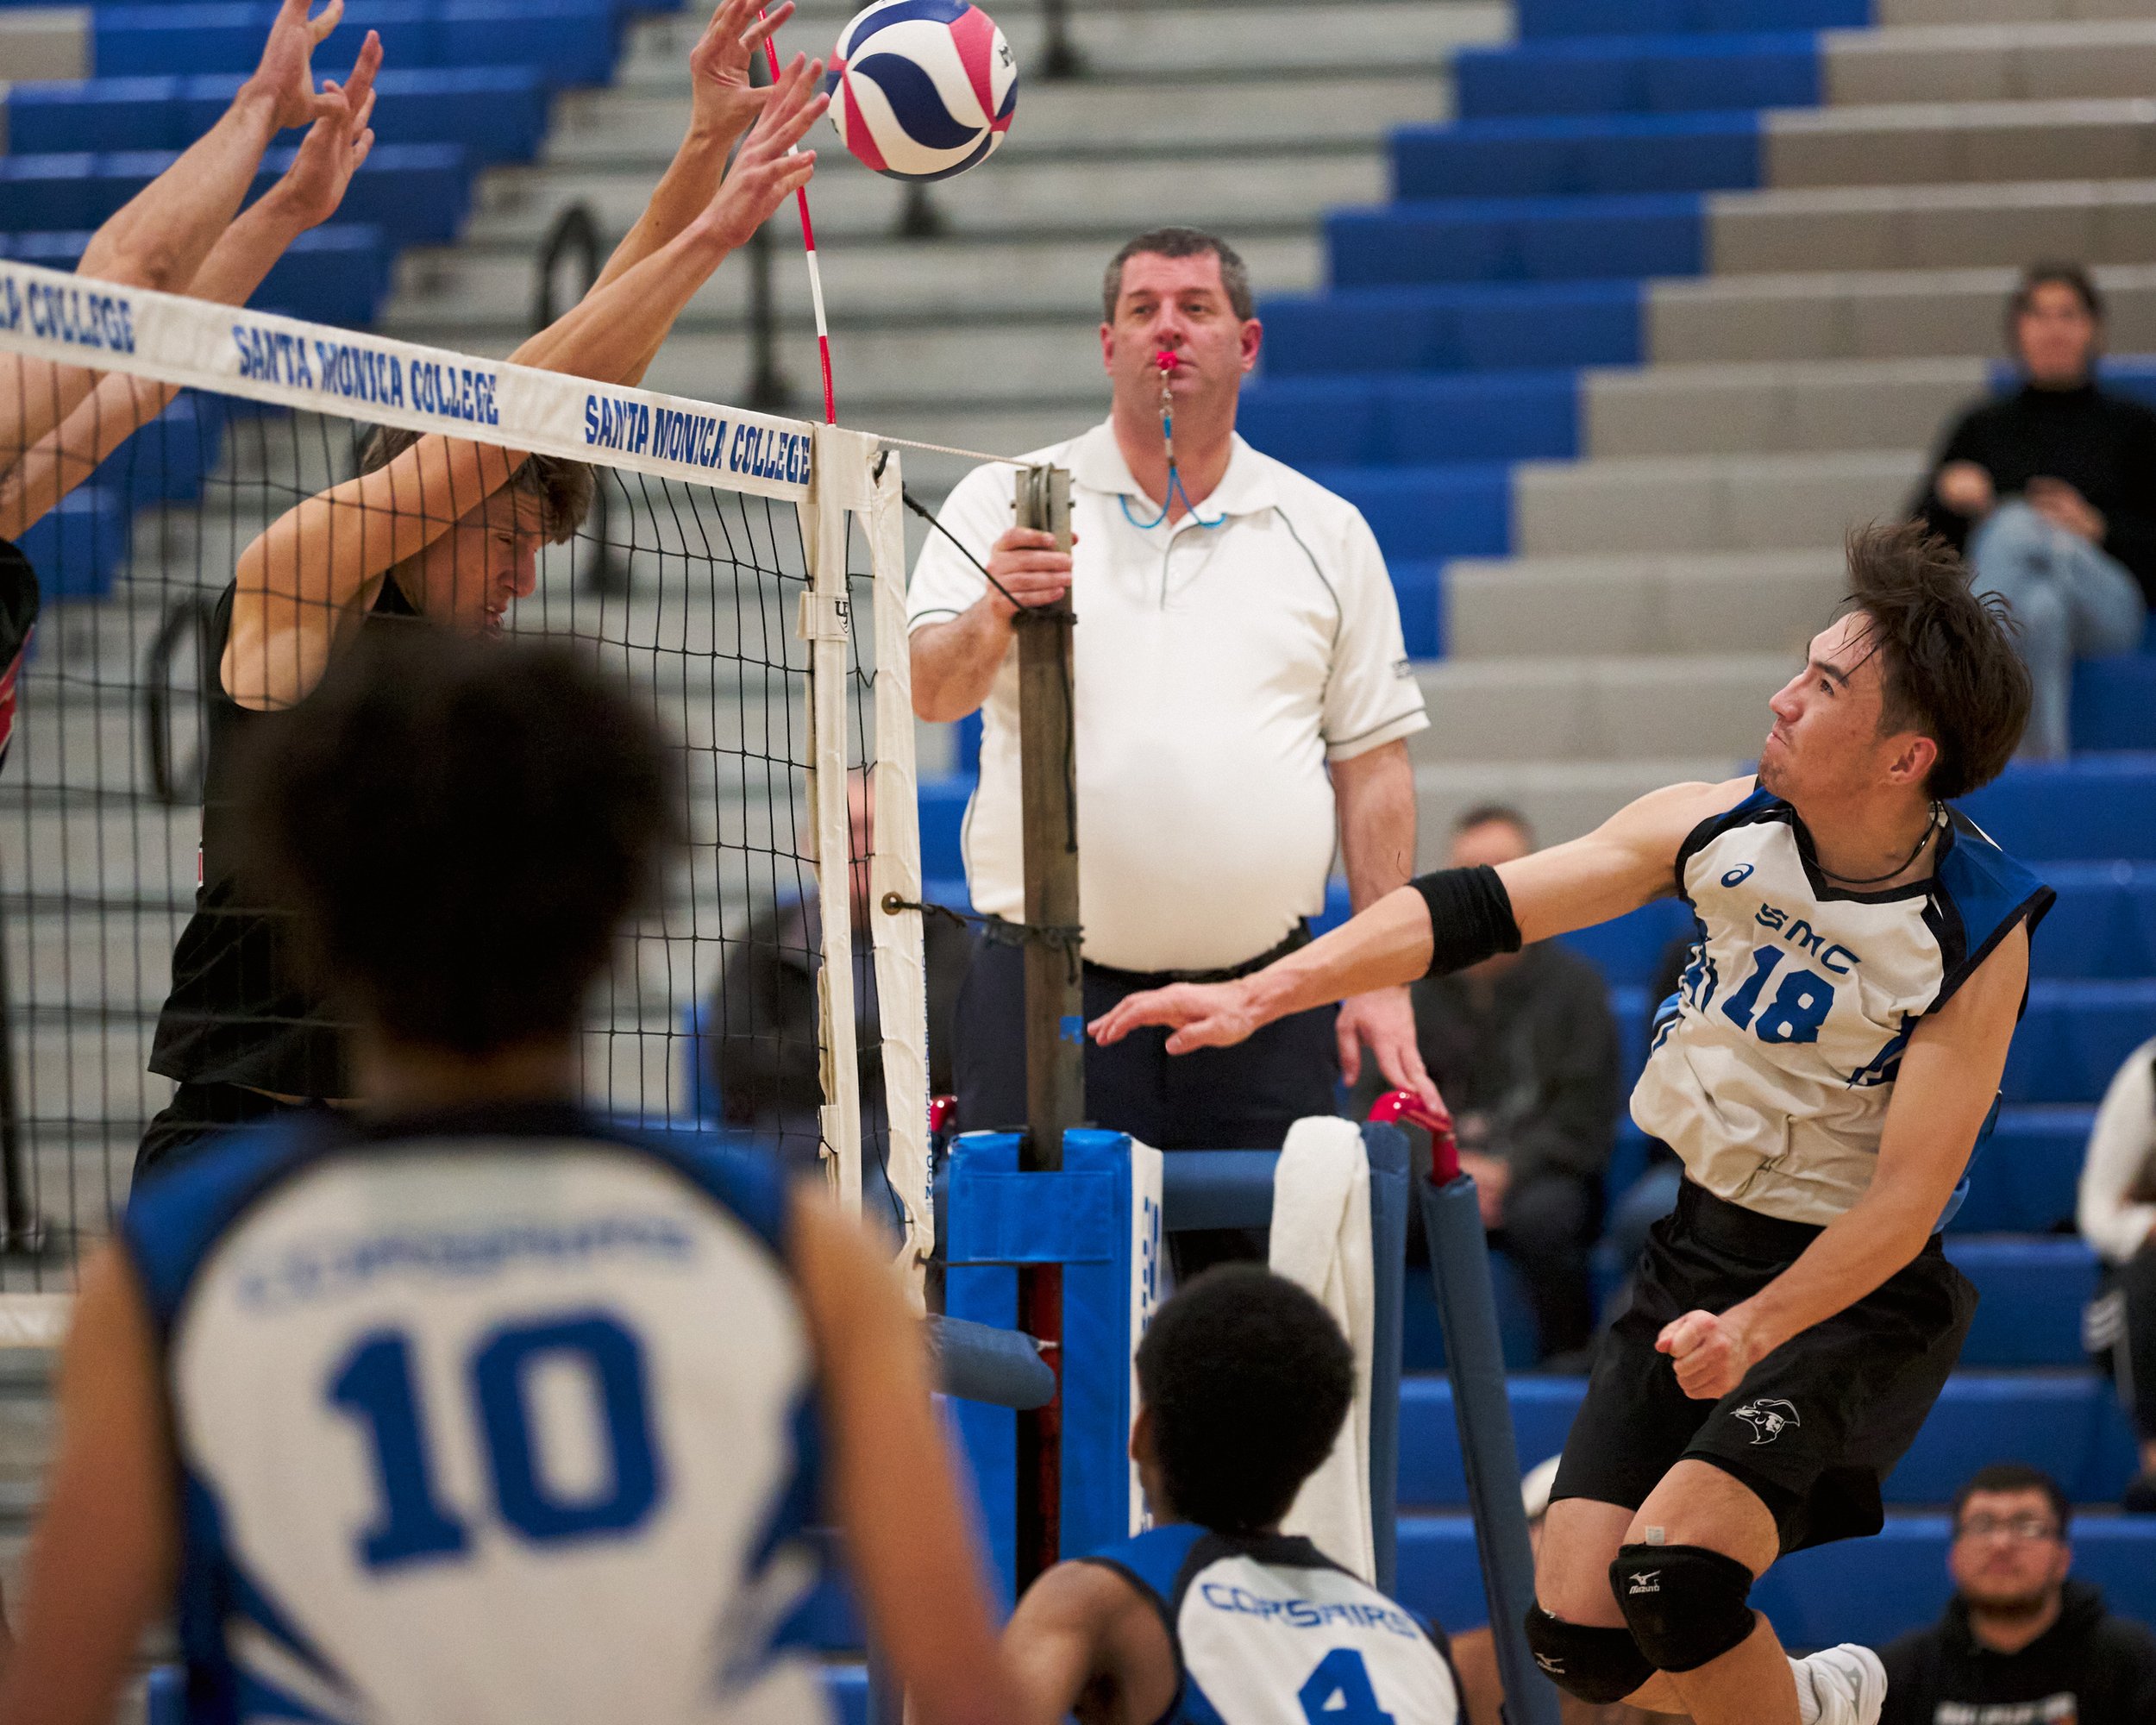  Long Beach City College Vikings' Cole Oliver blocks the ball sent from Santa Monica College Corsairs' Enkhtur Tserendavaa during the men's volleyball match on Friday, March 4, 2023, at Corsair Gym in Santa Monica, Calif. The Corsairs lost 3-0. (Nich